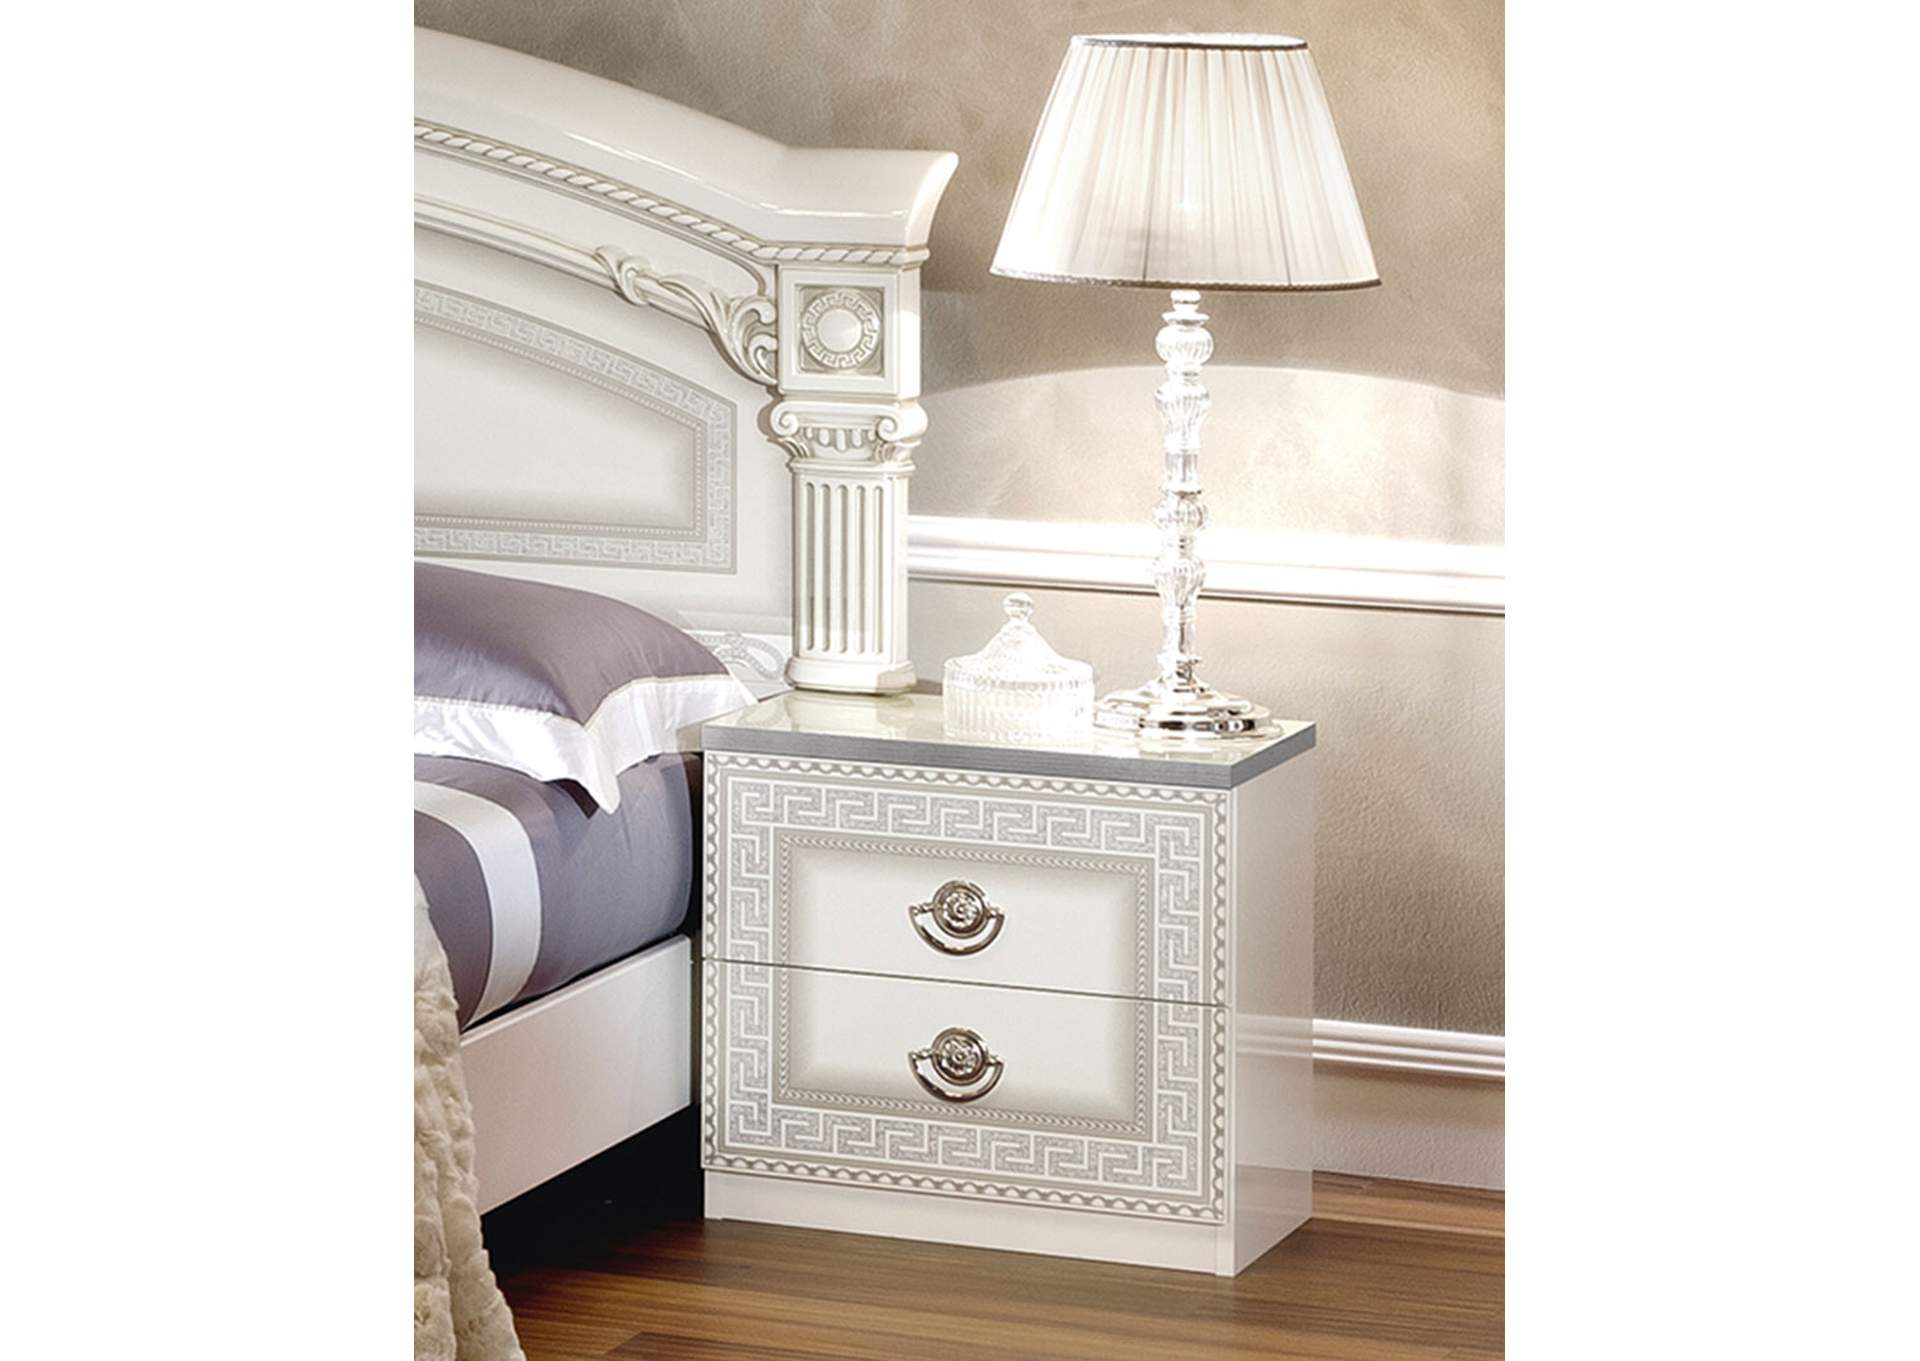 Aida Withe with Silver Vanity Dresser,ESF Wholesale Furniture